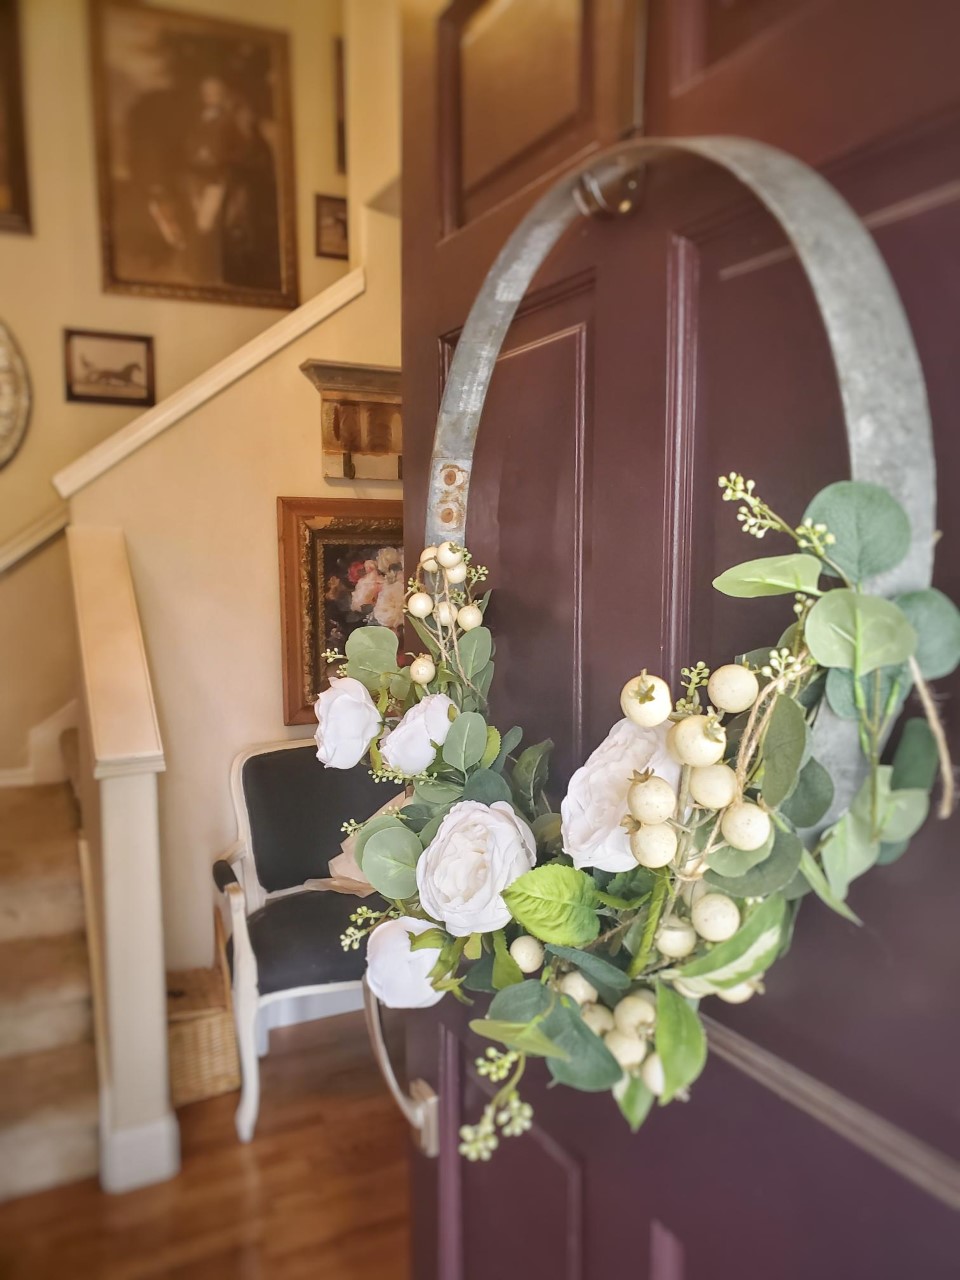 10 Easy Steps to Make a Spring Barrel Ring Wreath